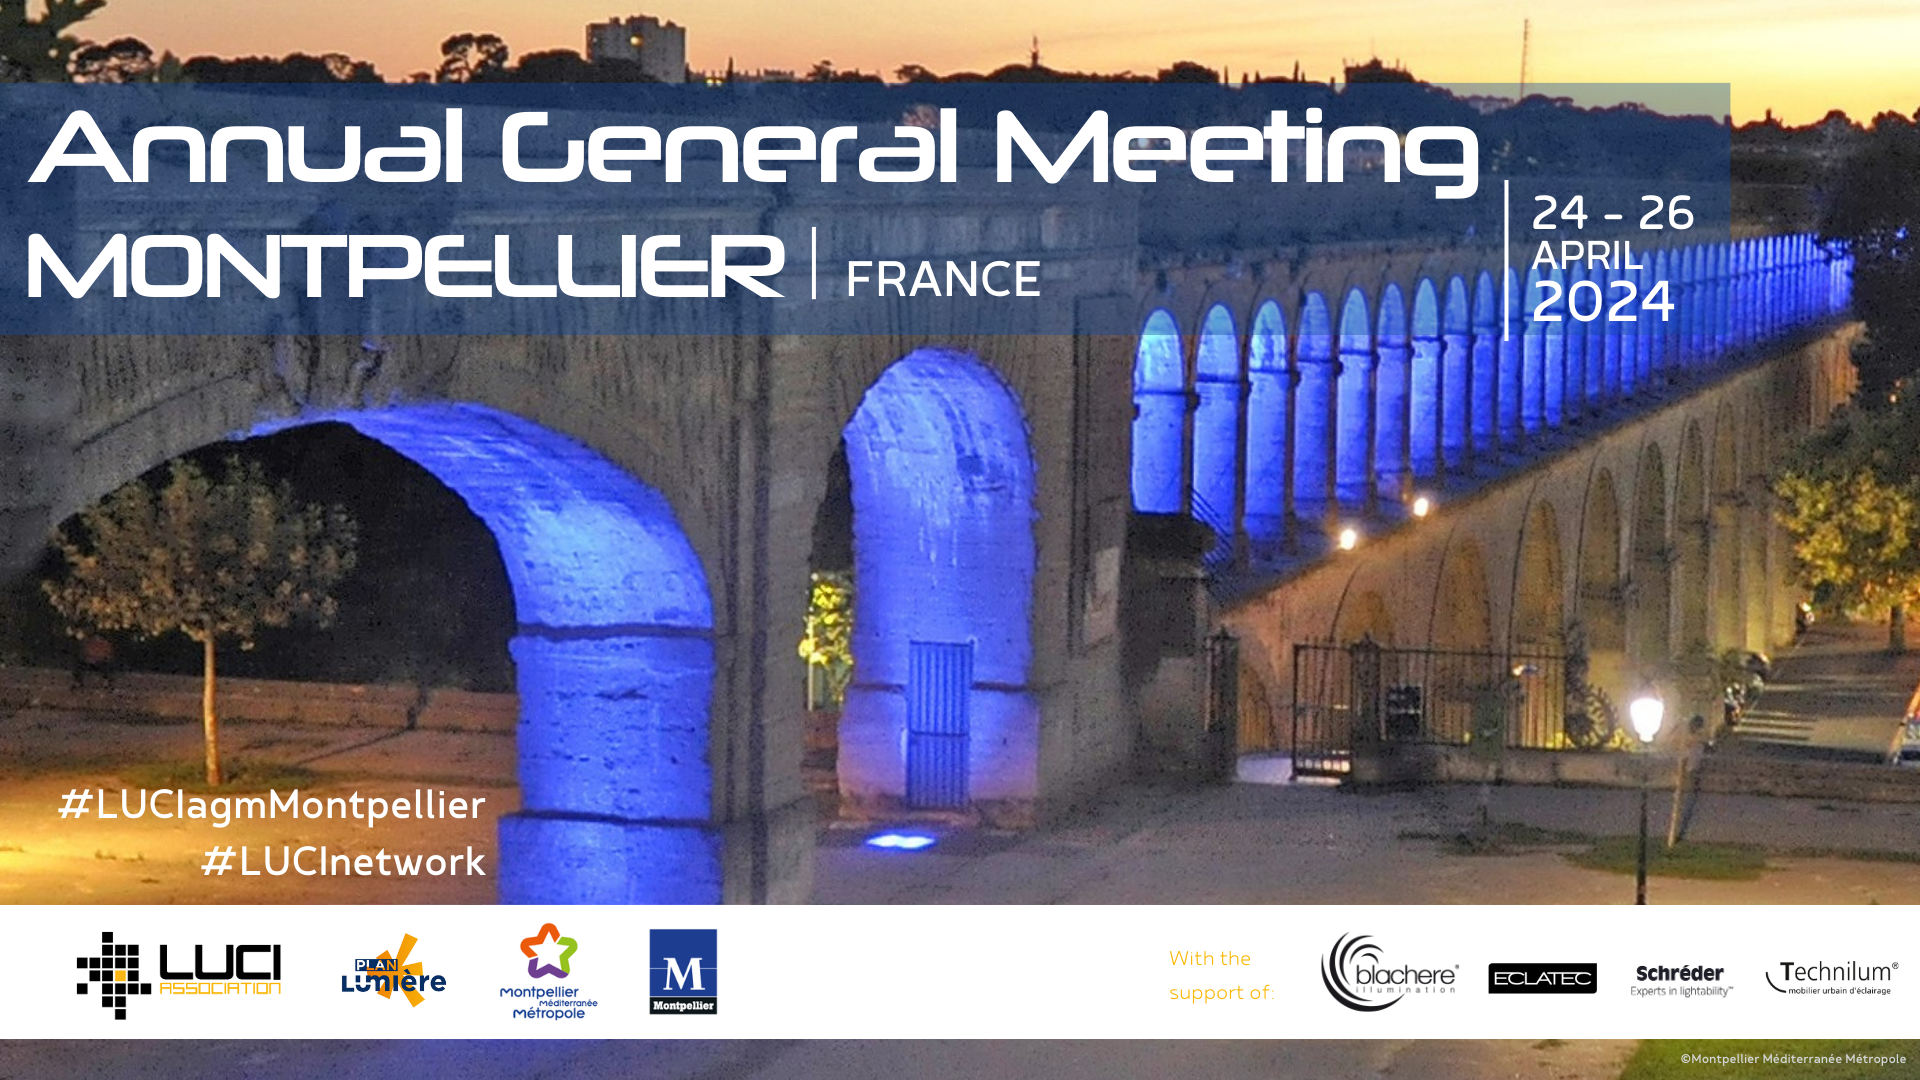 AGM Montpellier 2024 - Main visual with Sponsors.png